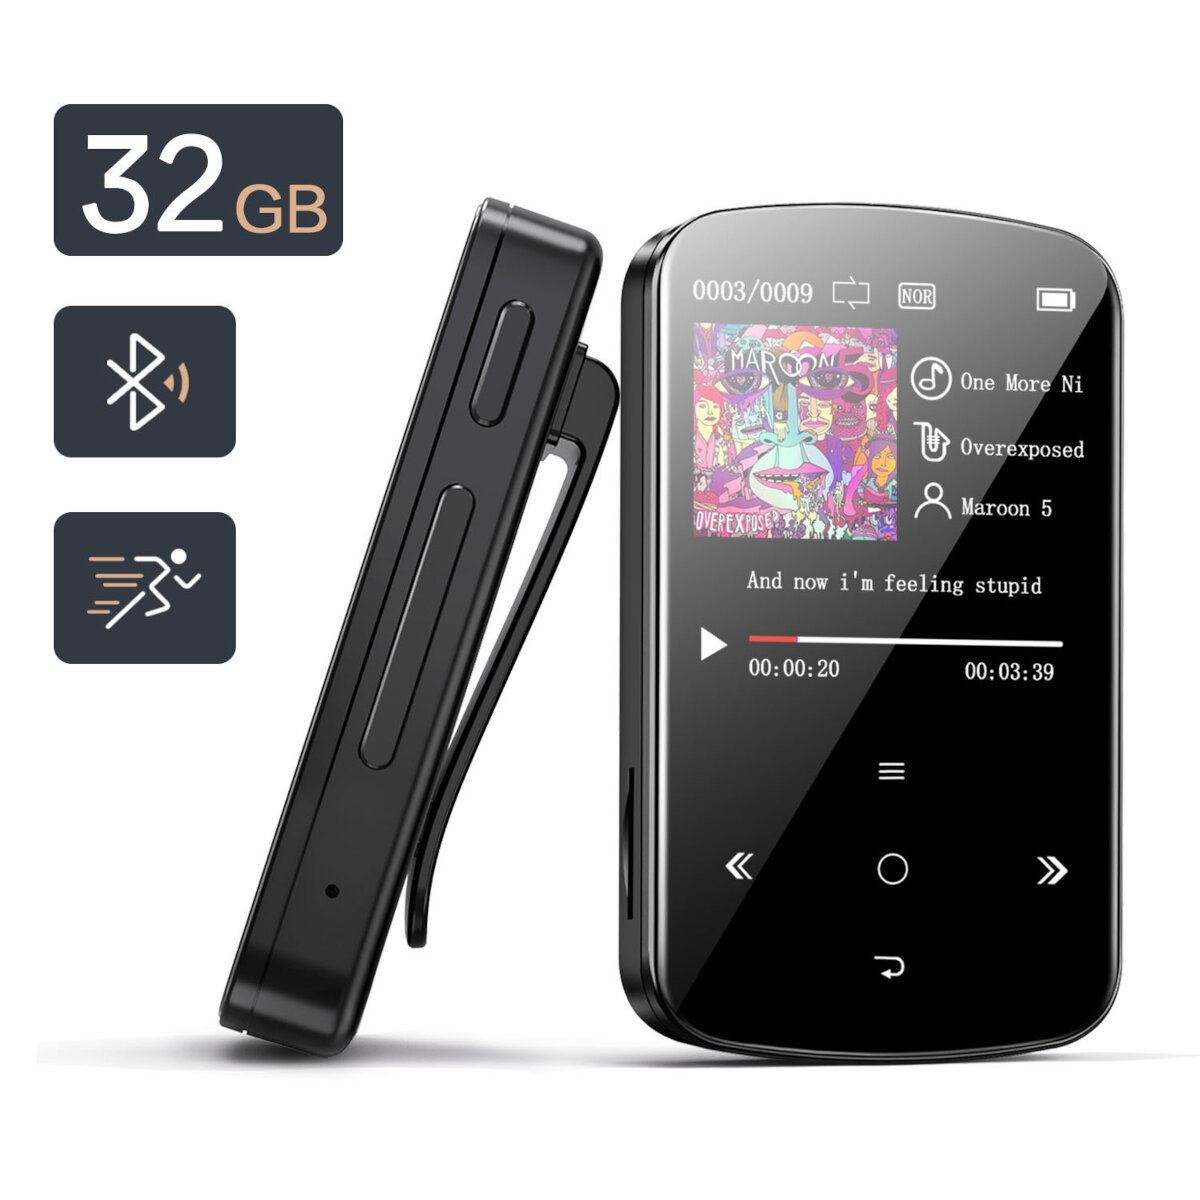 BENJIE M9 32GB Mini USB MP3 Sport Media Player 1.5 inch Color Screen Wireless Bluetooth 4.2 with Portable Clip TF Card S